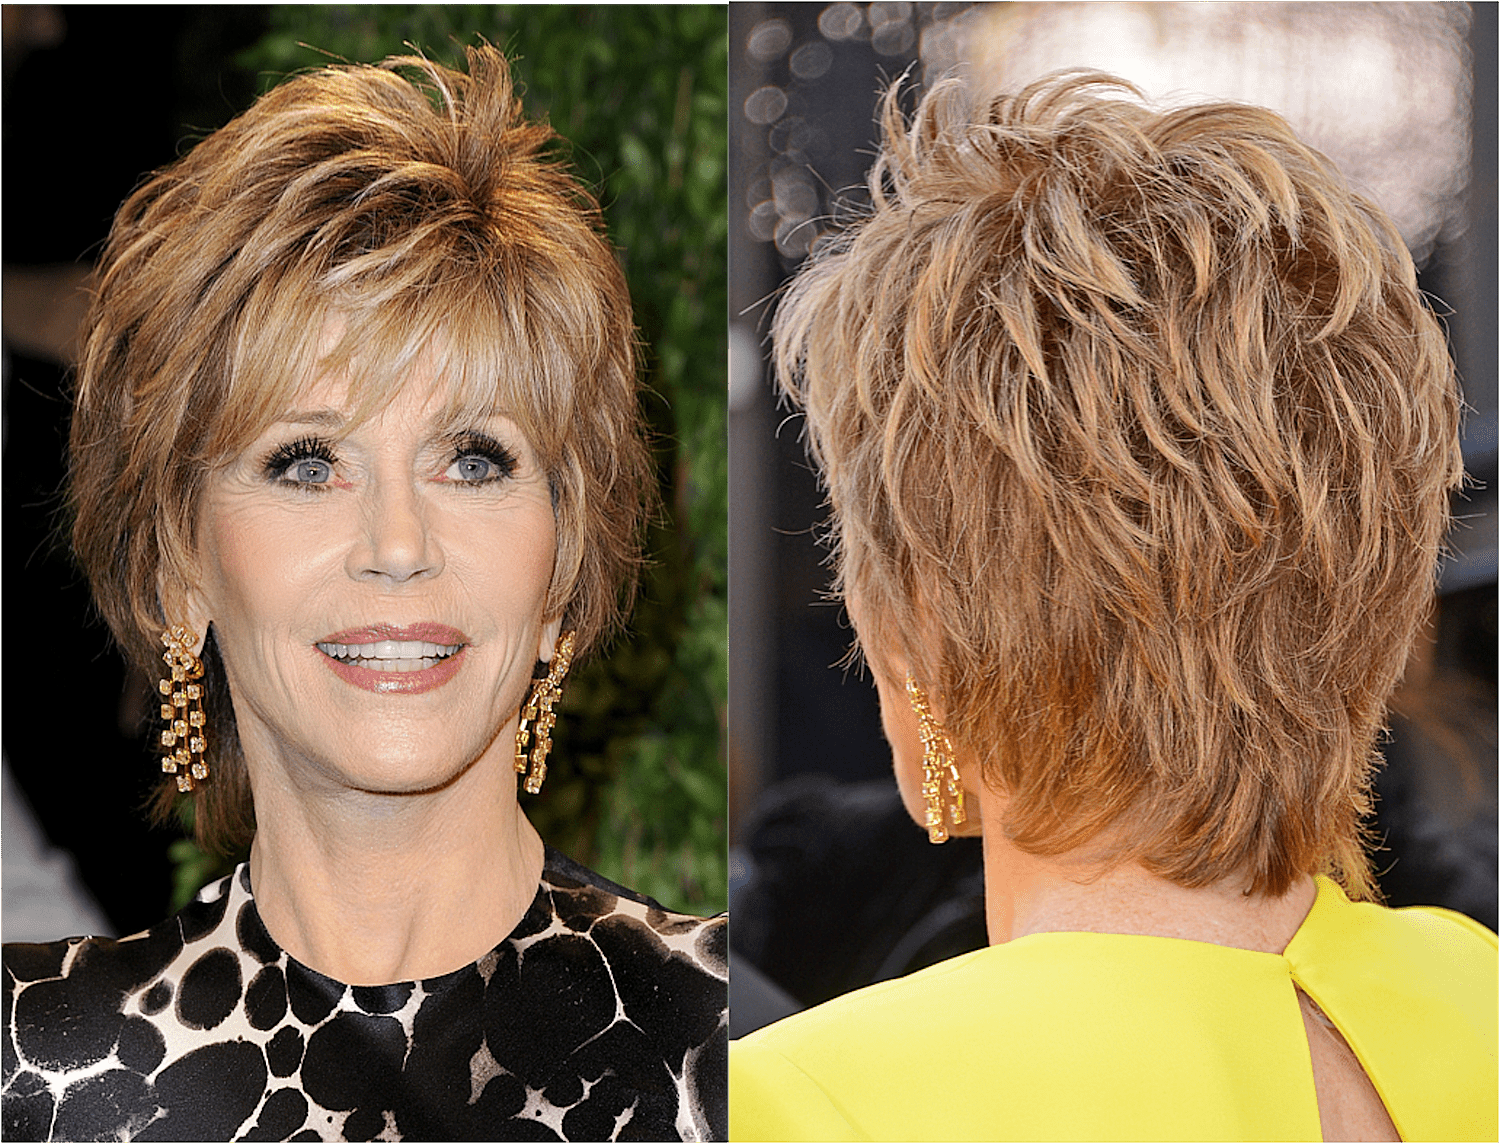 Popular haircuts for ladies over 60, how to choose the best one